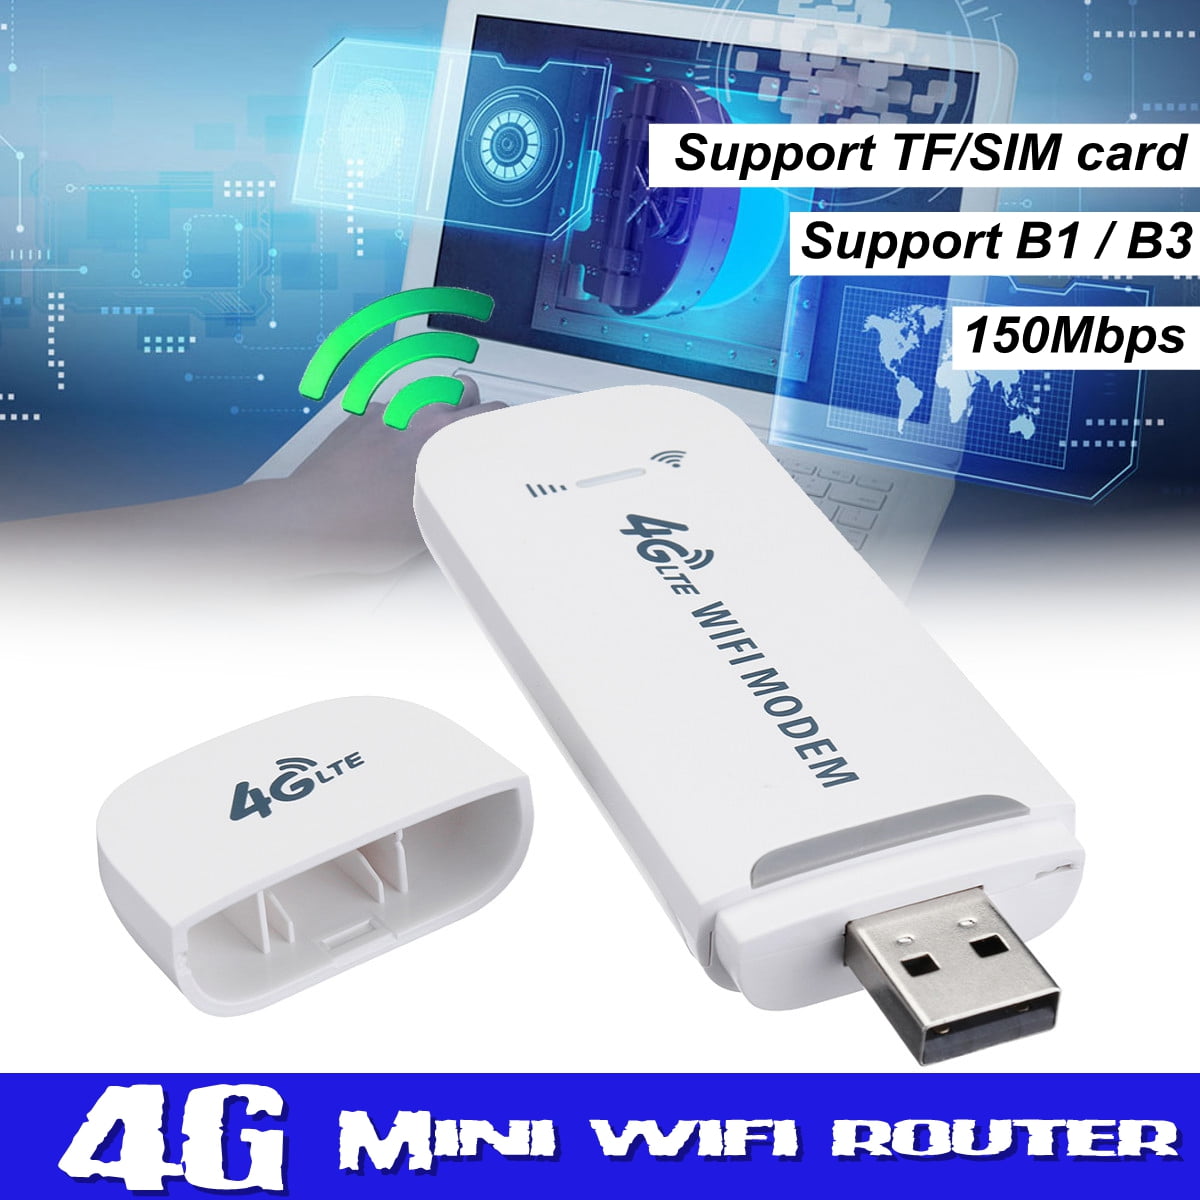 Portable Router 4g Lte Wifi Wireless Router Usb Dongle Stick